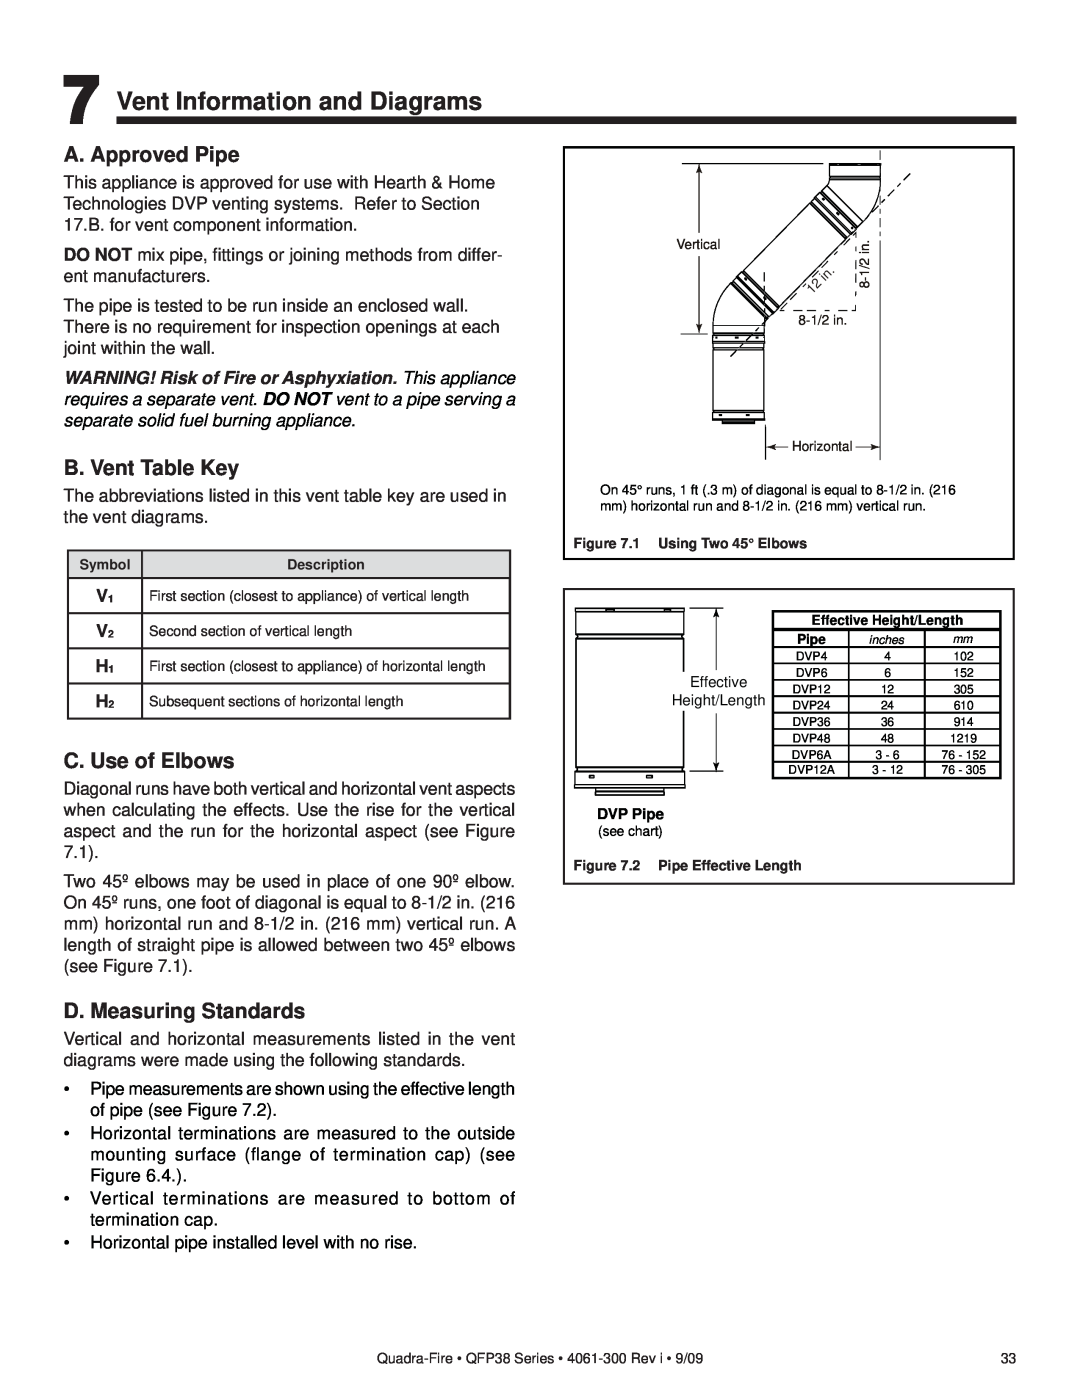 Quadra-Fire QFP38-LP, QFP38-NG Vent Information and Diagrams, A. Approved Pipe, B. Vent Table Key, C. Use of Elbows 